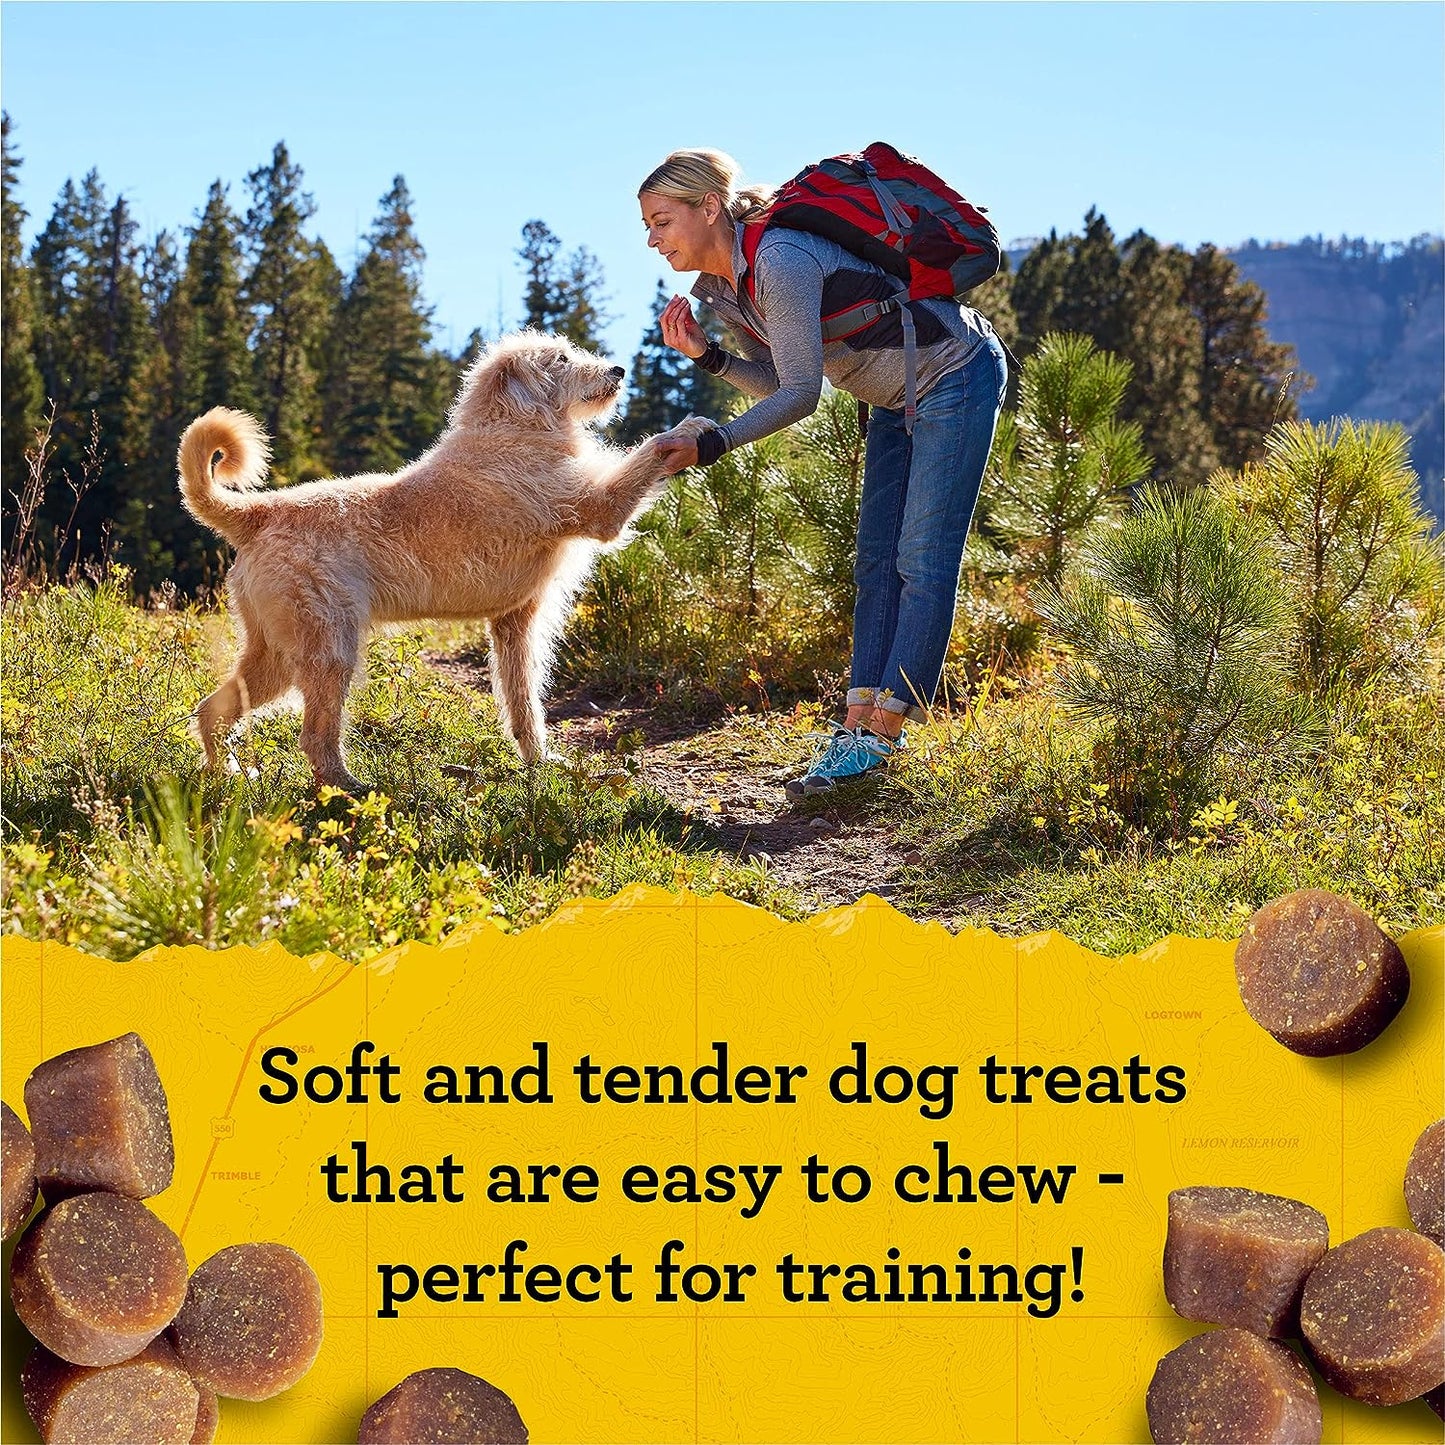 Zuke's Mini Naturals - Soft Peanut Butter & Oats - Dog Treats - #1 Recommended for training puppies!